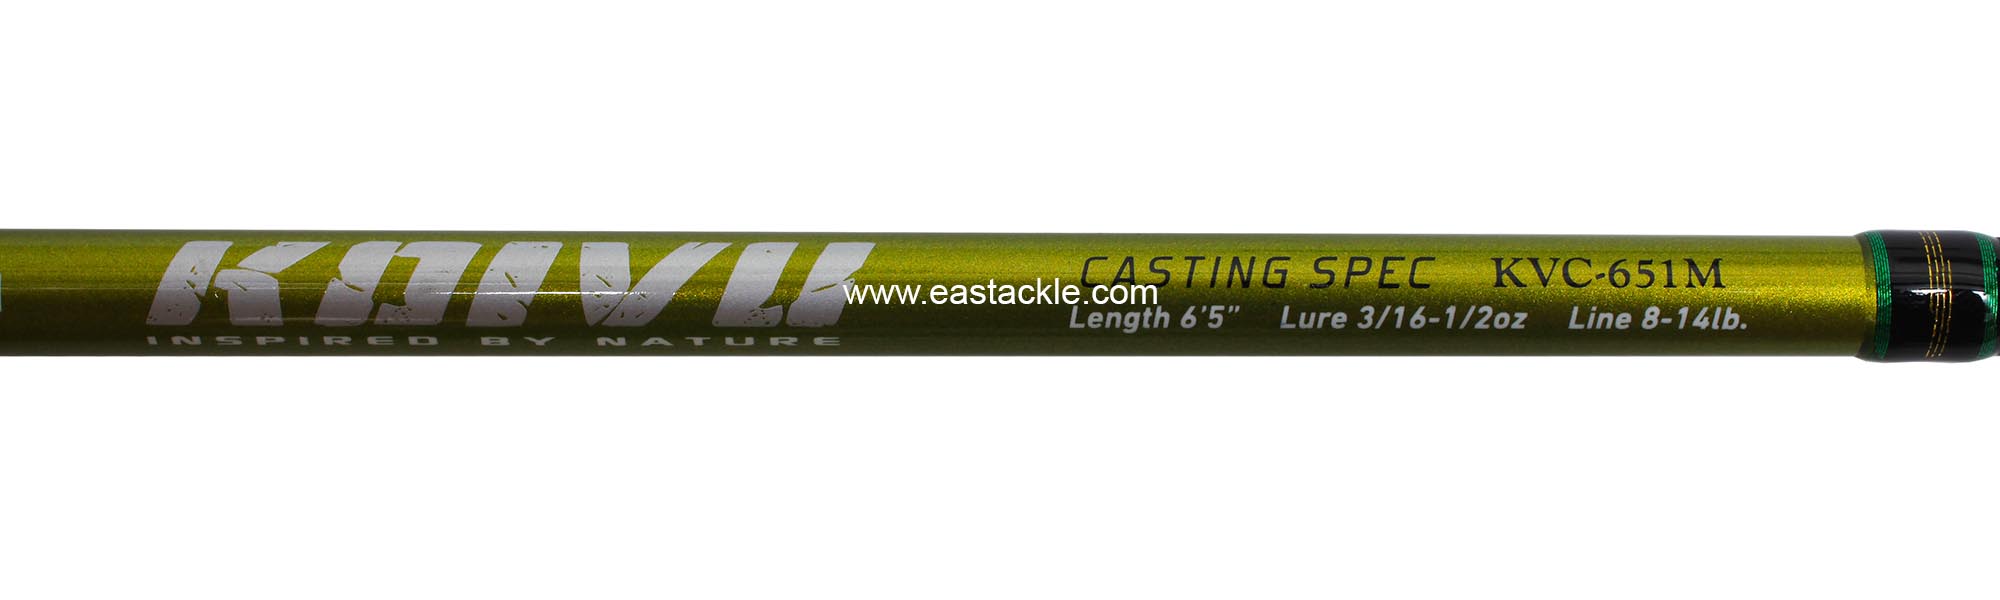 Rapala - Koivu - KVC651M - Bait Casting Rod - Blank Specifications (Top View) | Eastackle